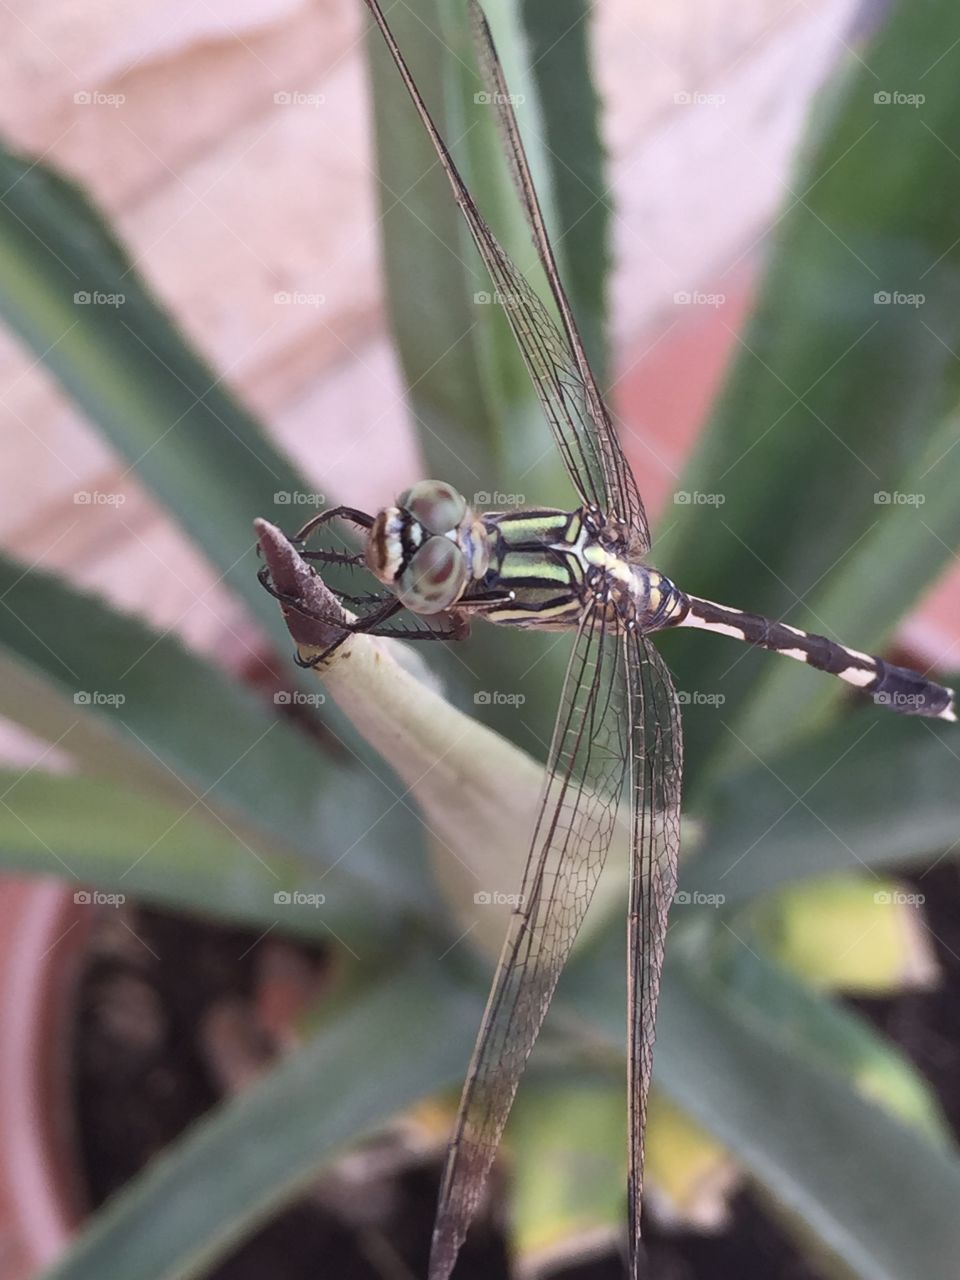 Dragonfly . Taking a photo with my iphone6 to the Dragonfly which dies not seem to care